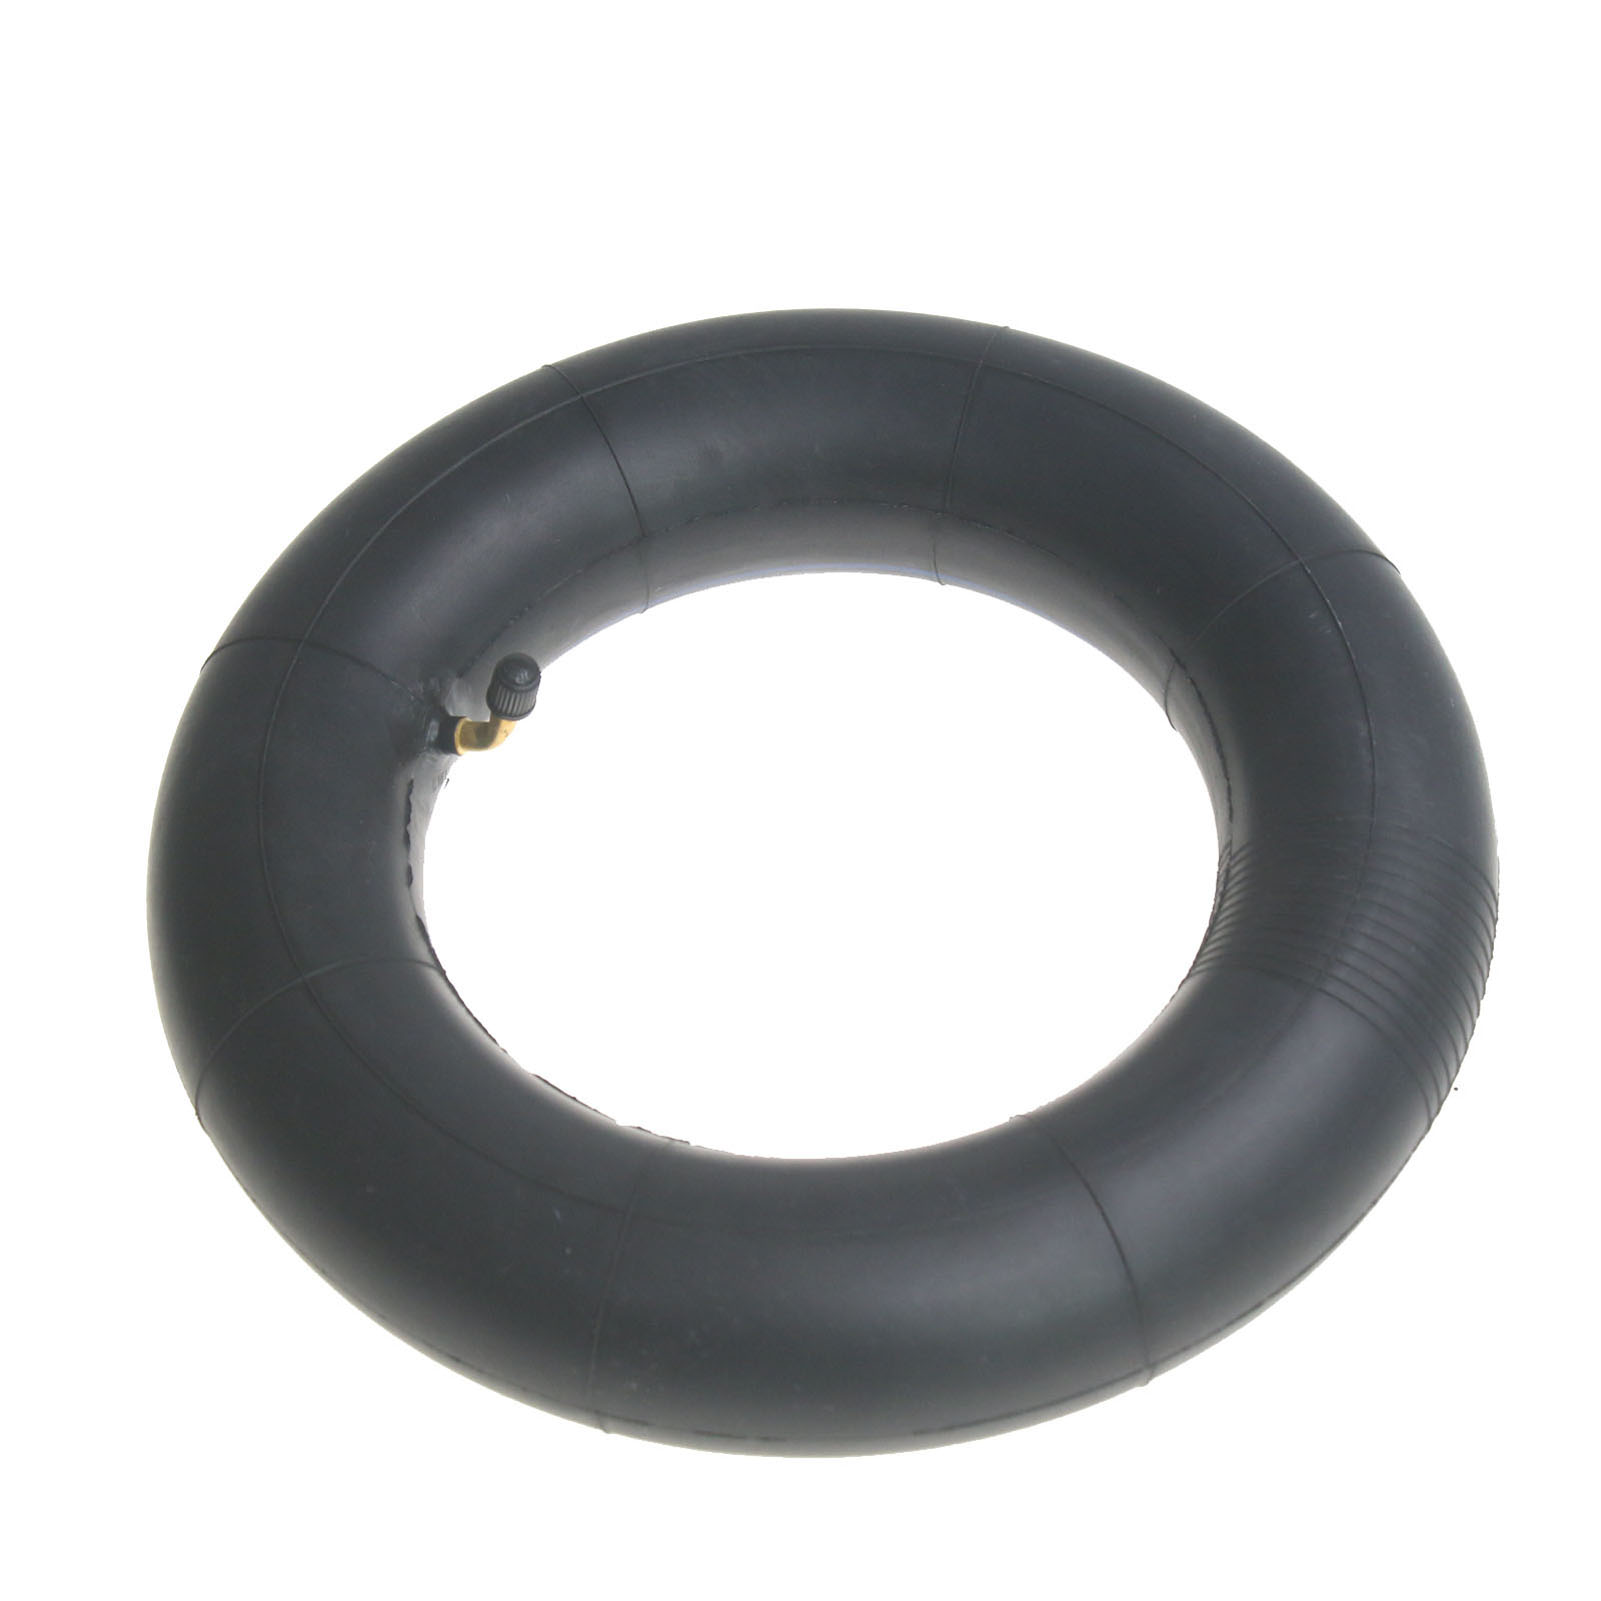 Thickened 10 * 3 Inner Tube Electric Scooter Tire 255 * 80 Inner Tube Suitable for 90/65-6.5 and 80/65-6.5 Tires 240mm Diameter Tire Electric Skateboard Inner Tube - image 5 of 5